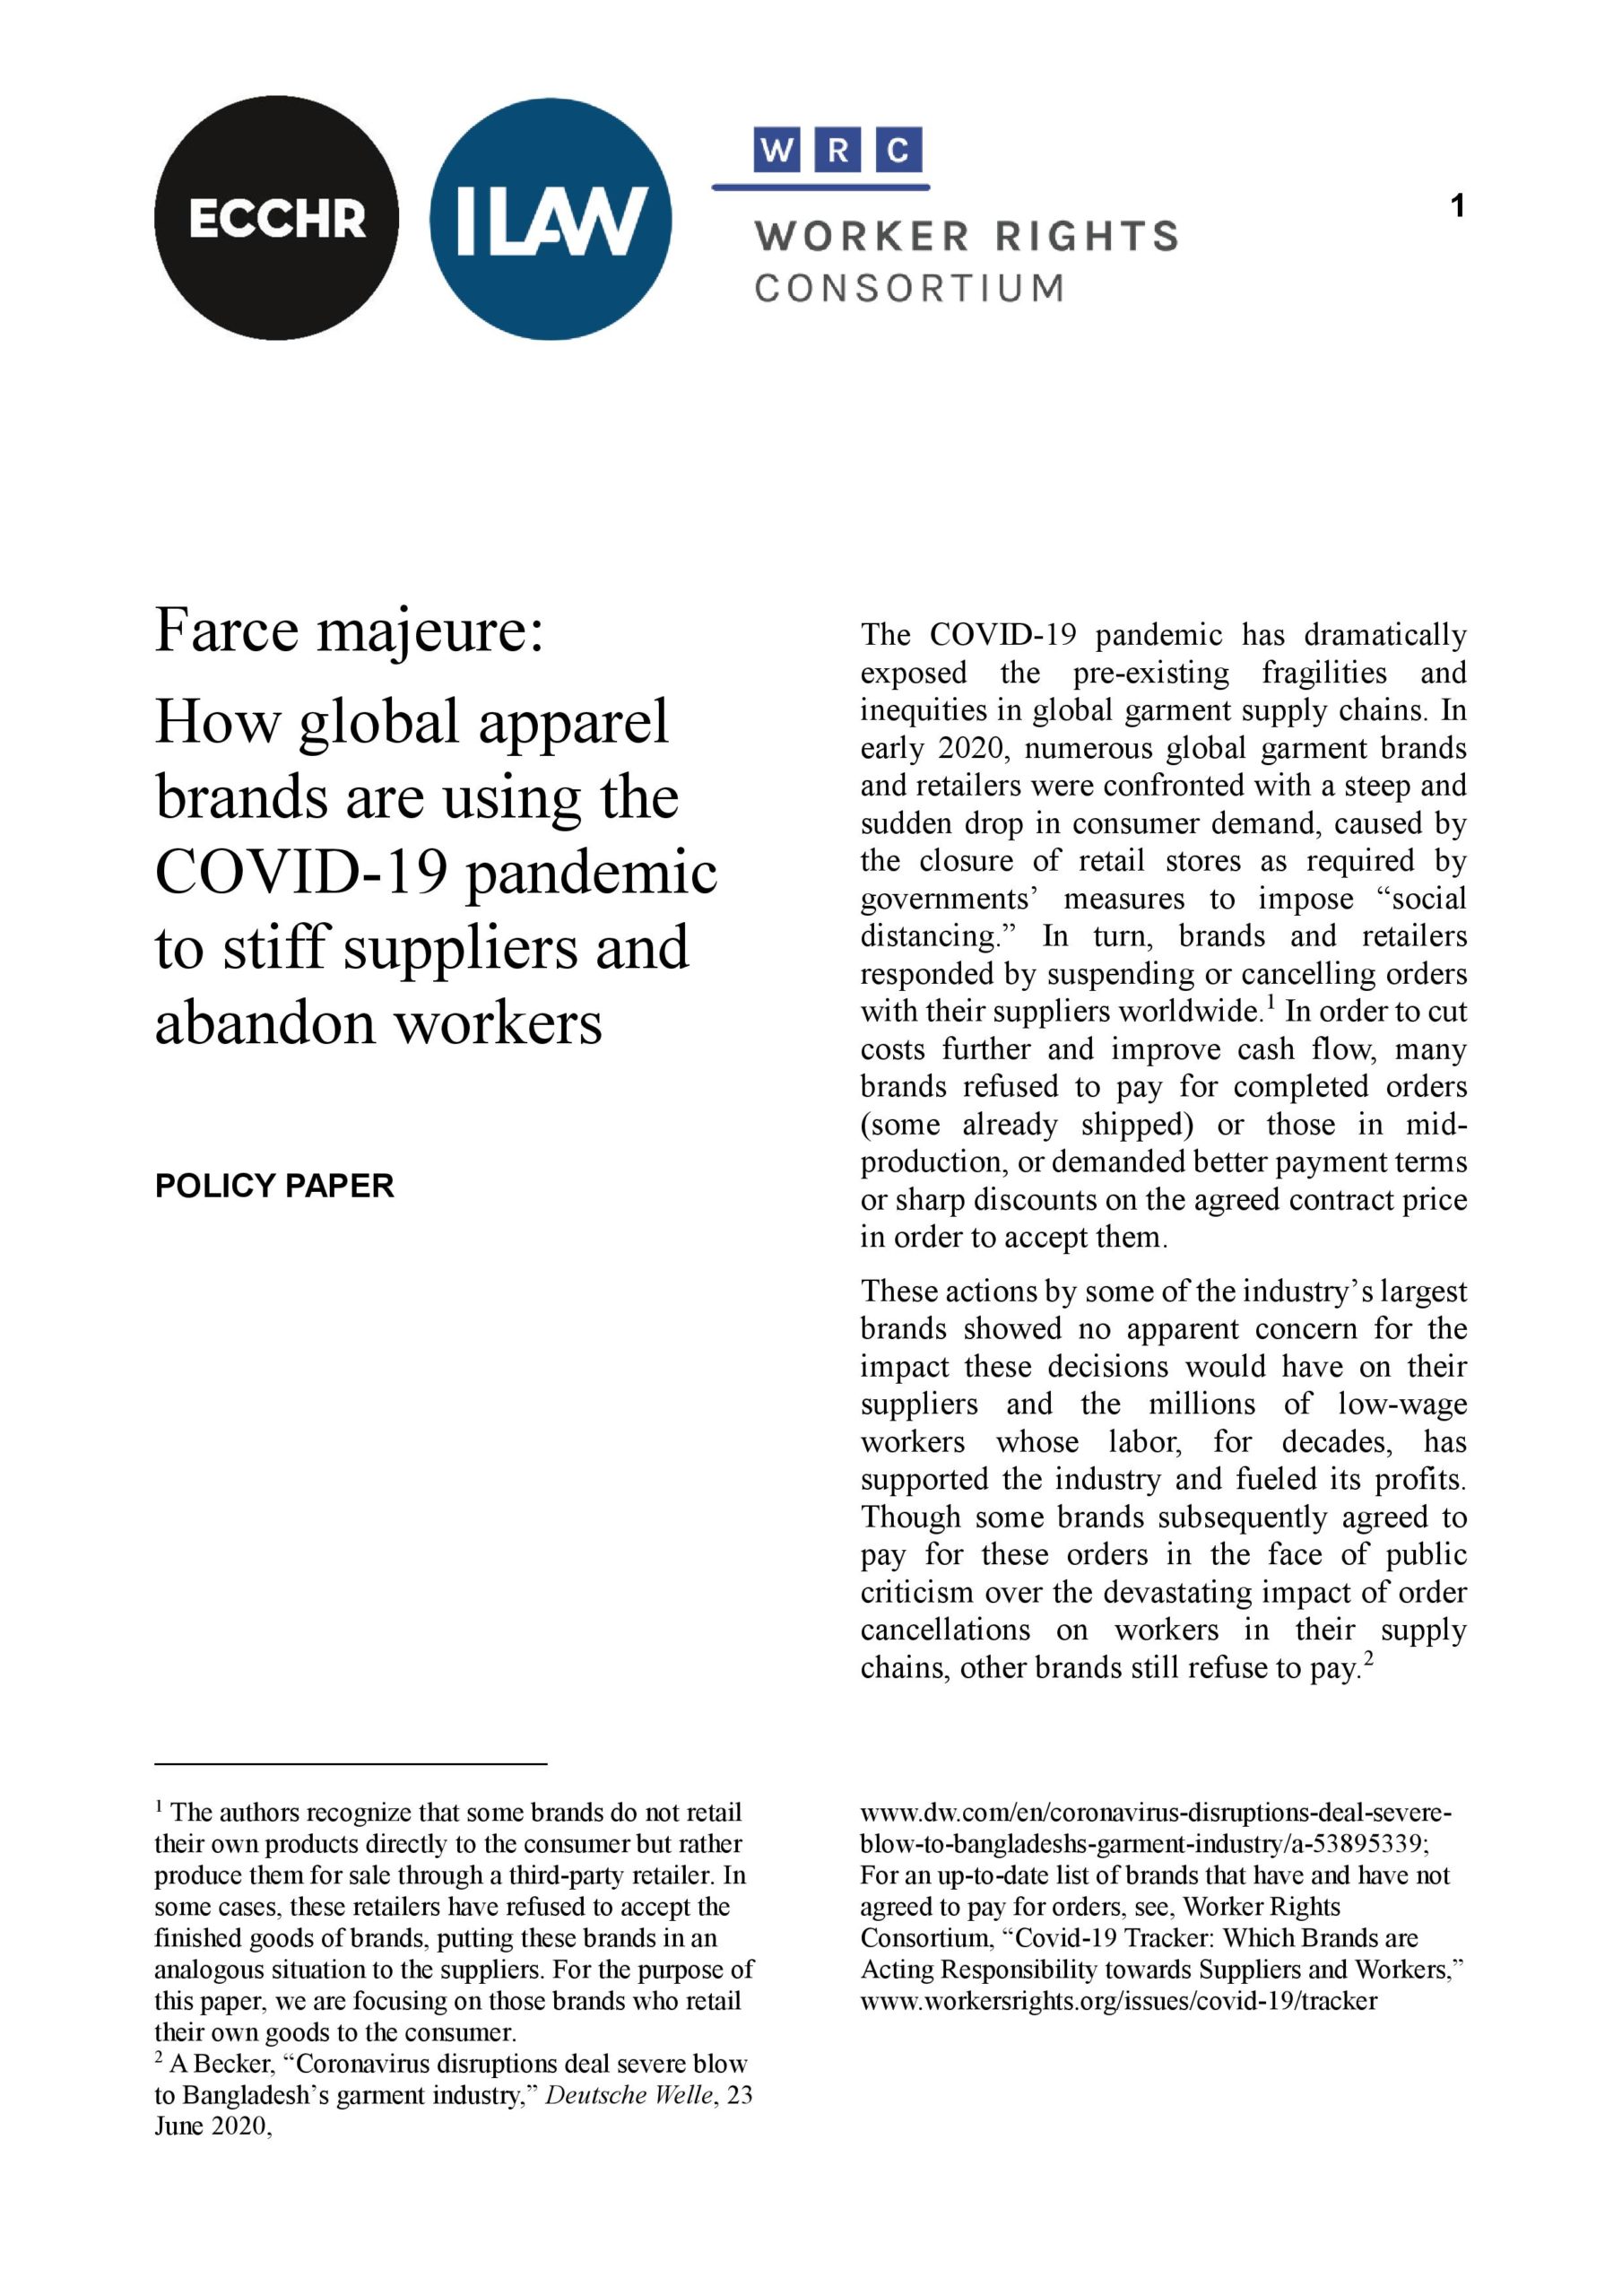 Farce majeure: How global apparel brands are using the Covid-19 pandemic to stiff suppliers and abandon workers